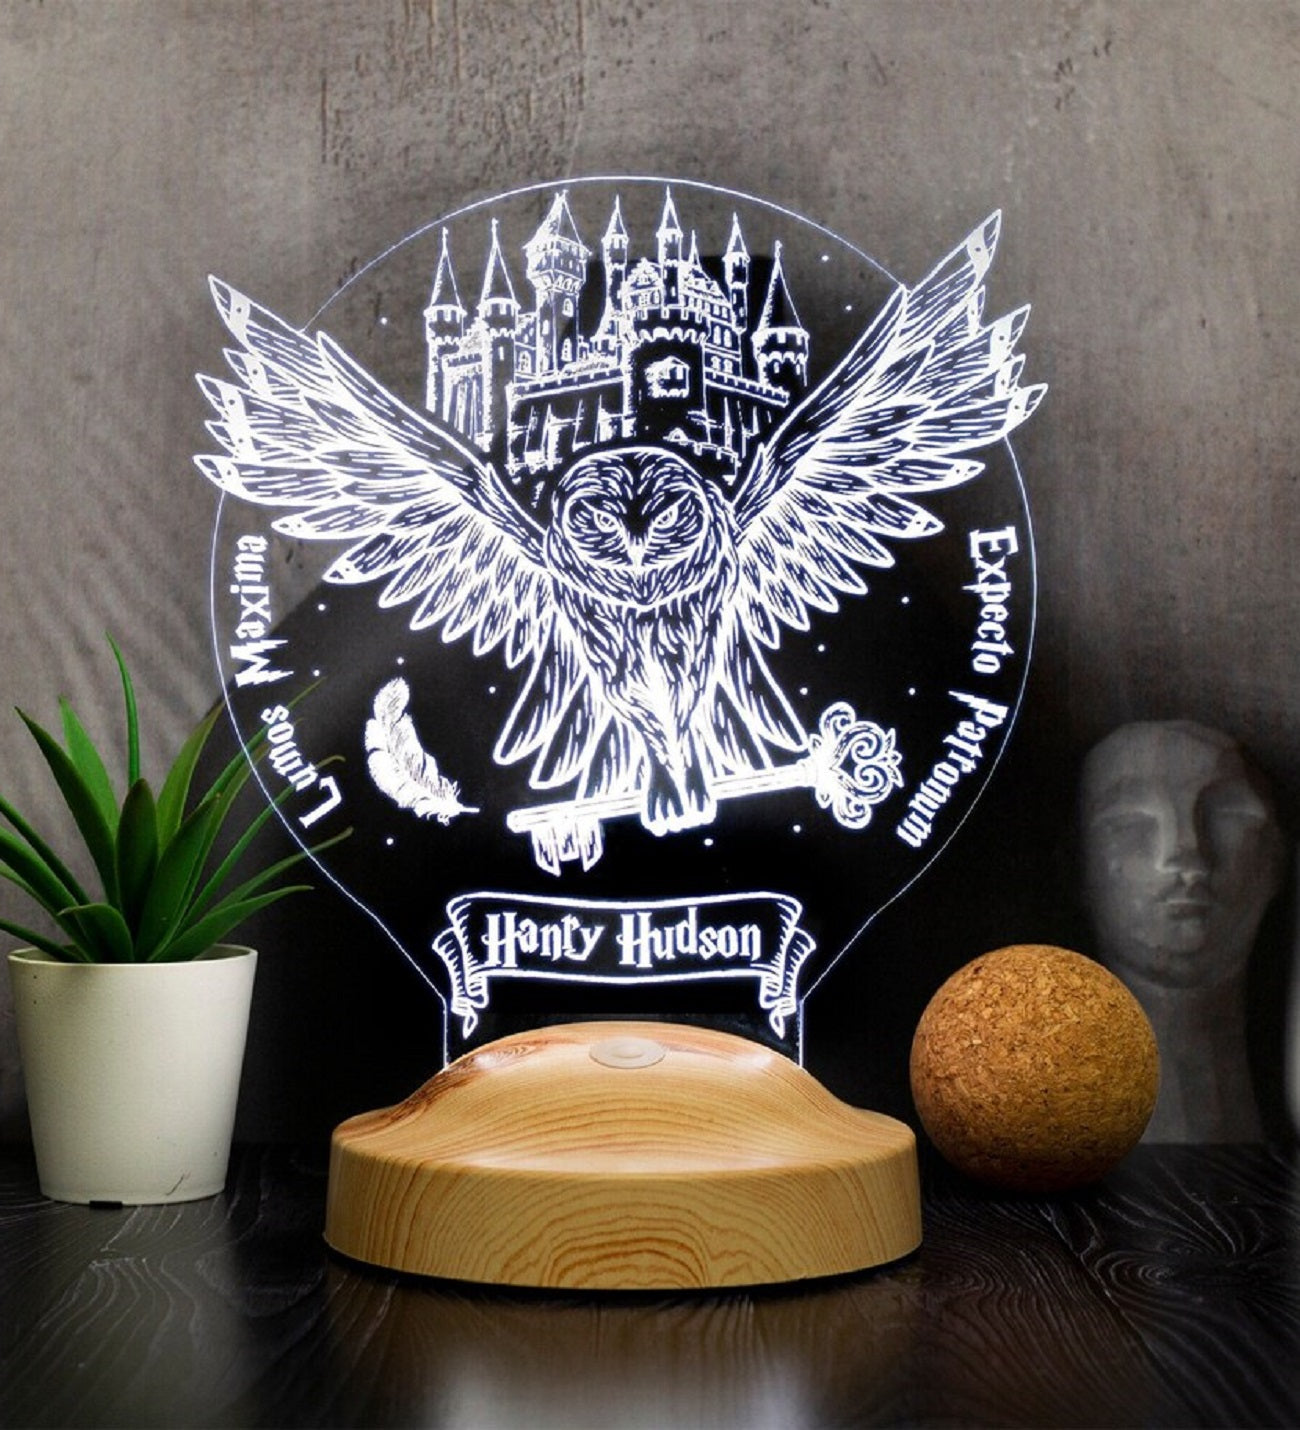 OWL PERSONALIZED LAMP WITH ENGRAVING 3D VISION LED NIGHT LIGHT